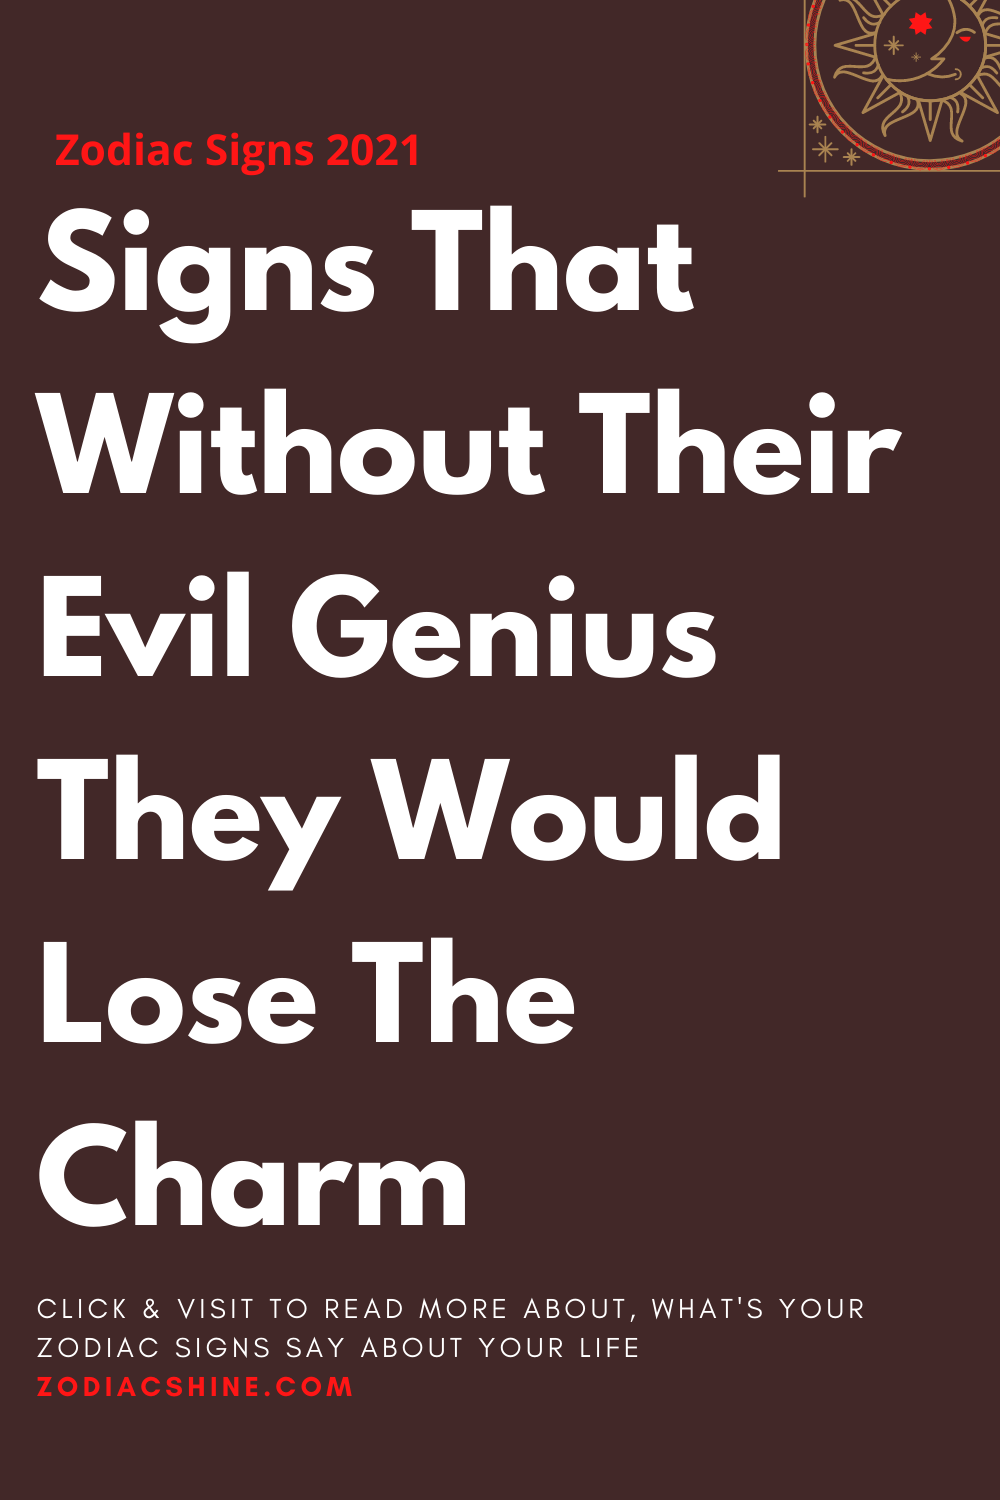 Signs That Without Their Evil Genius They Would Lose The Charm